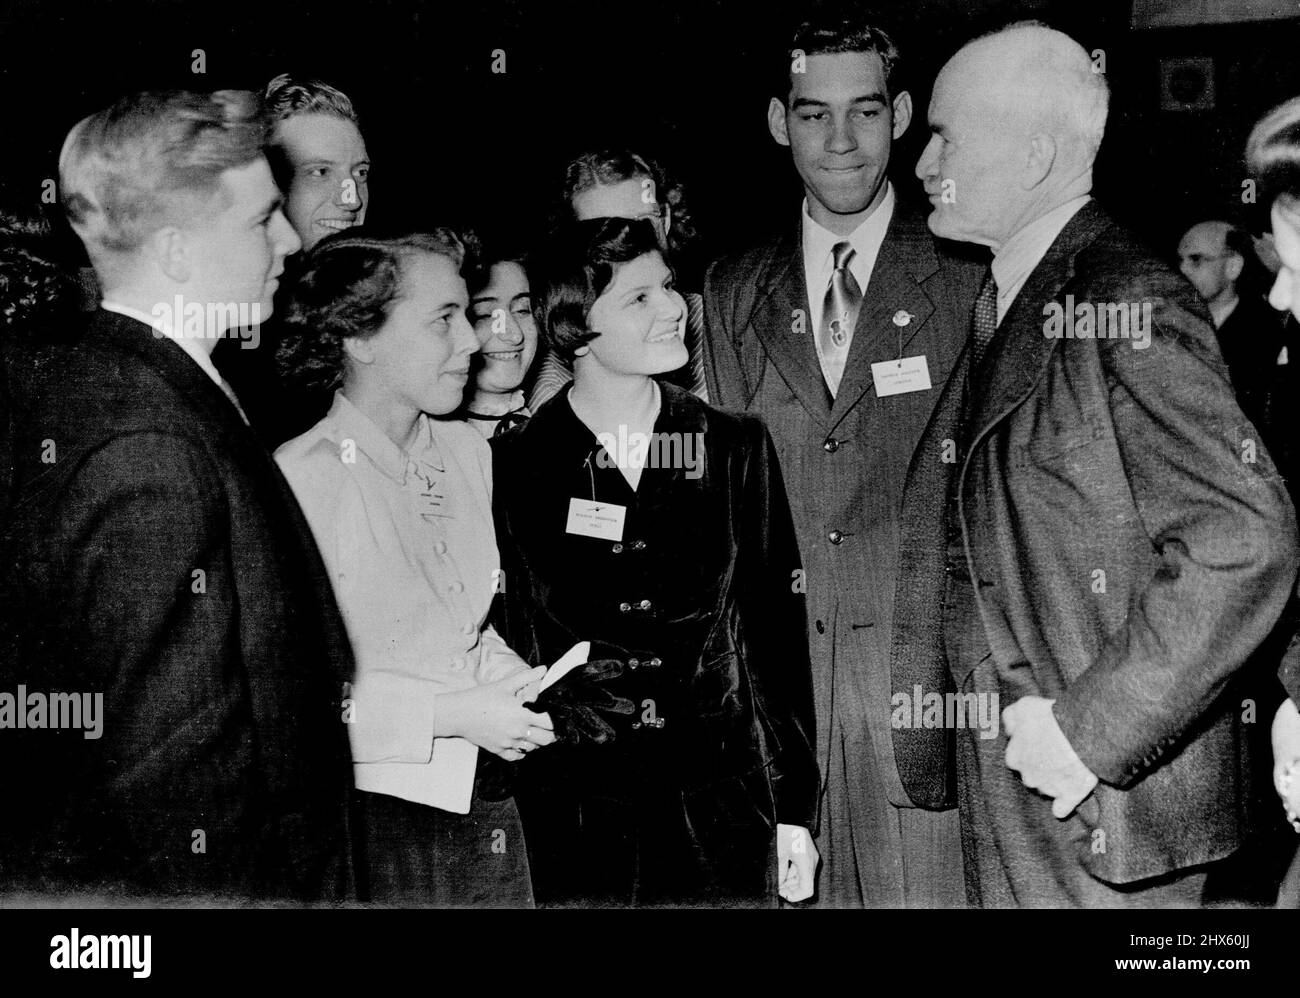 Reception To Daily Mail youth Foram At Hoare Memorial Hall -- Sir Ronald Adam Chairman of British council taking to Delegates of the youth Foram from all over the World. March 15, 1950. (Photo by Daily Mail Contract Picture).;Reception To Daily Mail youth Foram At Hoare Memorial Hall -- Sir Ronald Adam Chairman of British council taking to Delegates of the youth Foram from all over the World. Stock Photo